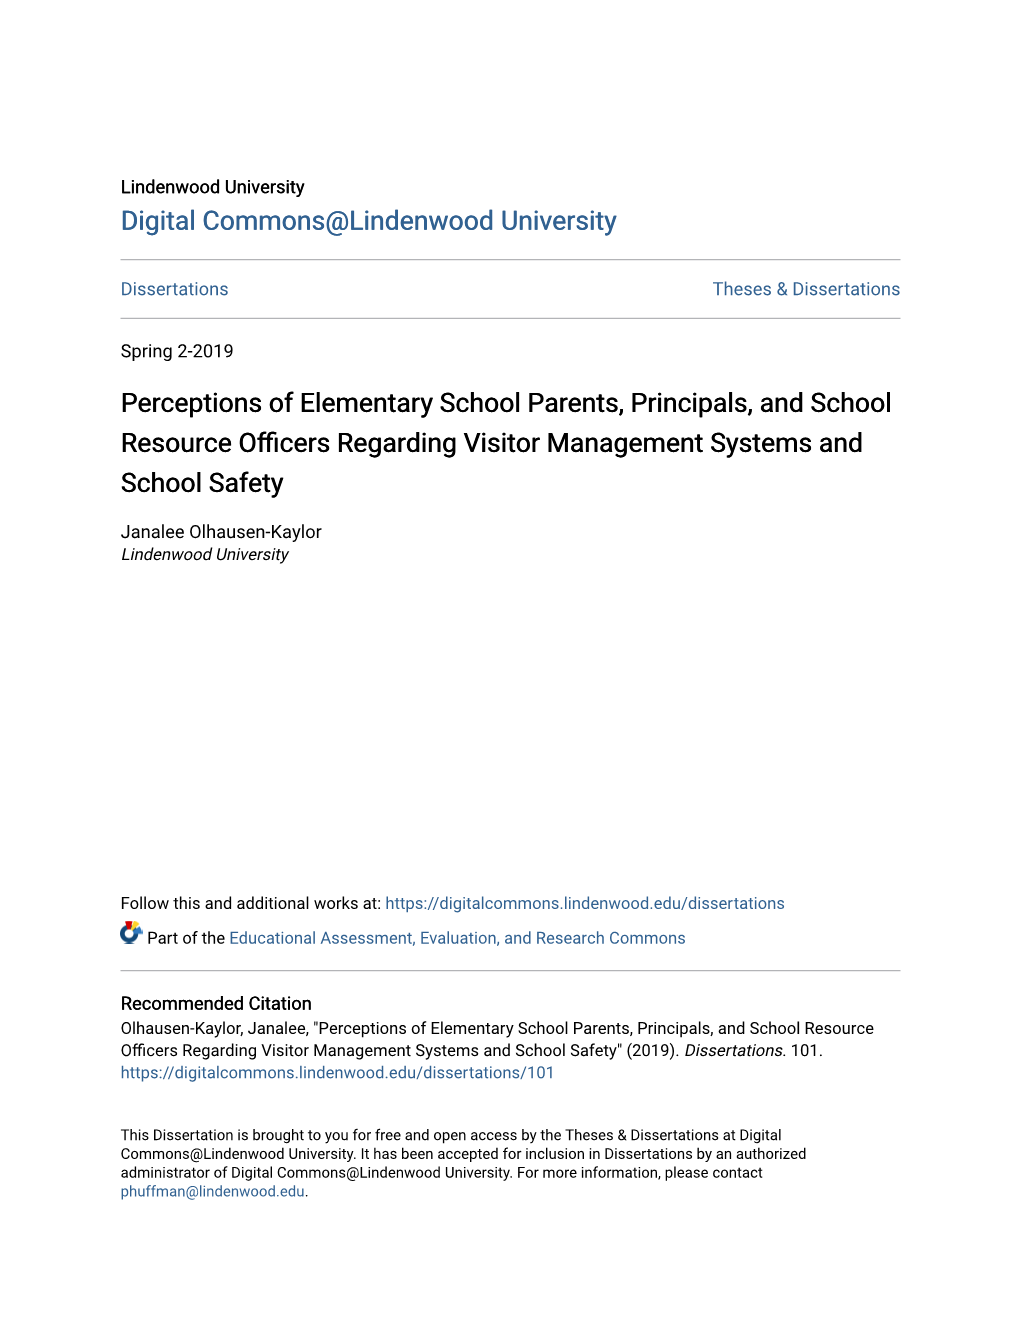 Perceptions of Elementary School Parents, Principals, and School Resource Officers Regarding Visitor Management Systems and School Safety